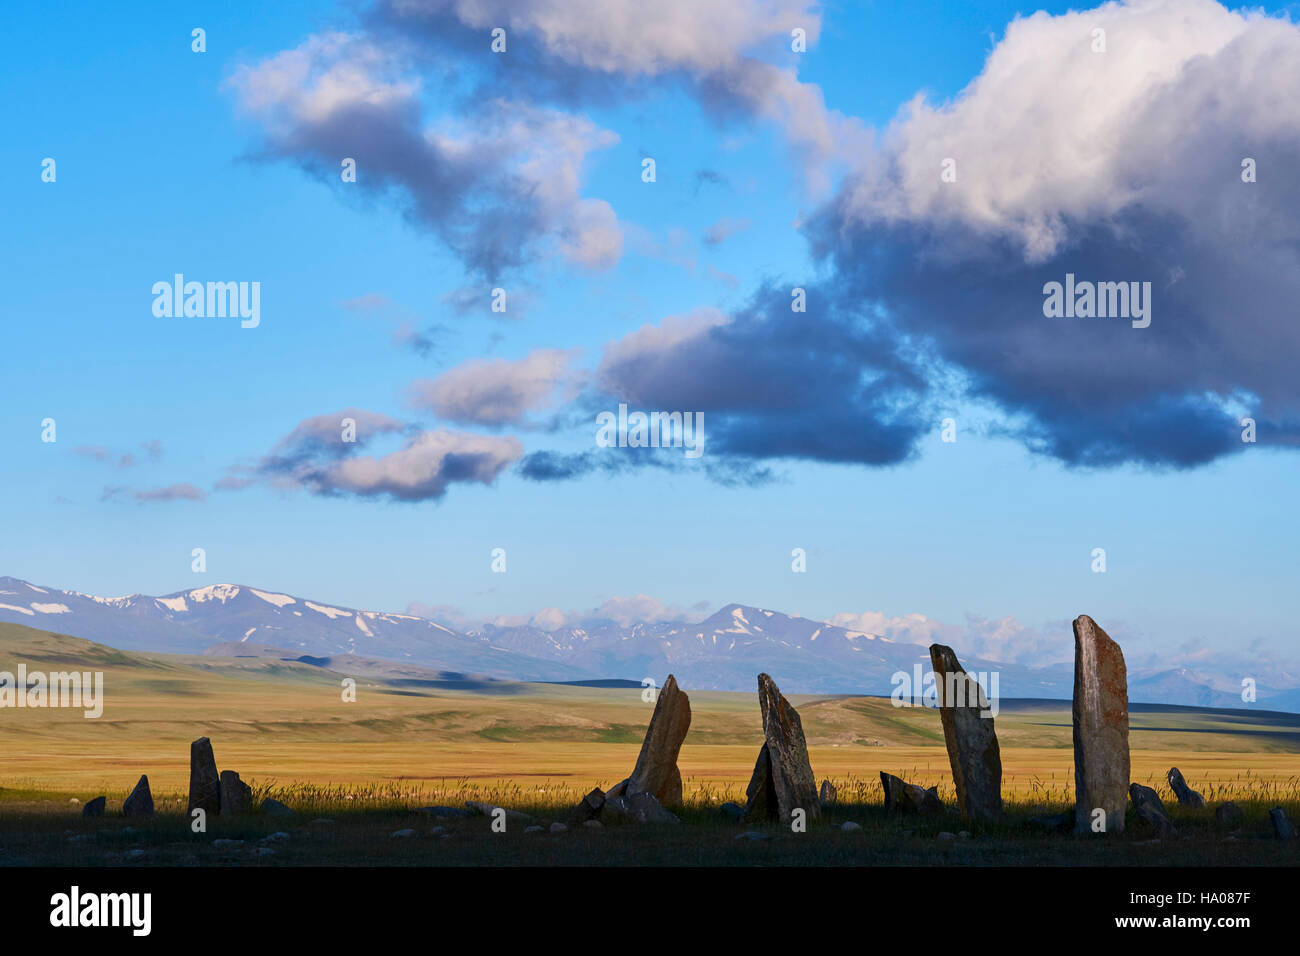 Mongolia, Bayan-Ulgii province, western Mongolia, National parc of Tavan Bogd, deer stone, funeral site, monolithic monument Stock Photo